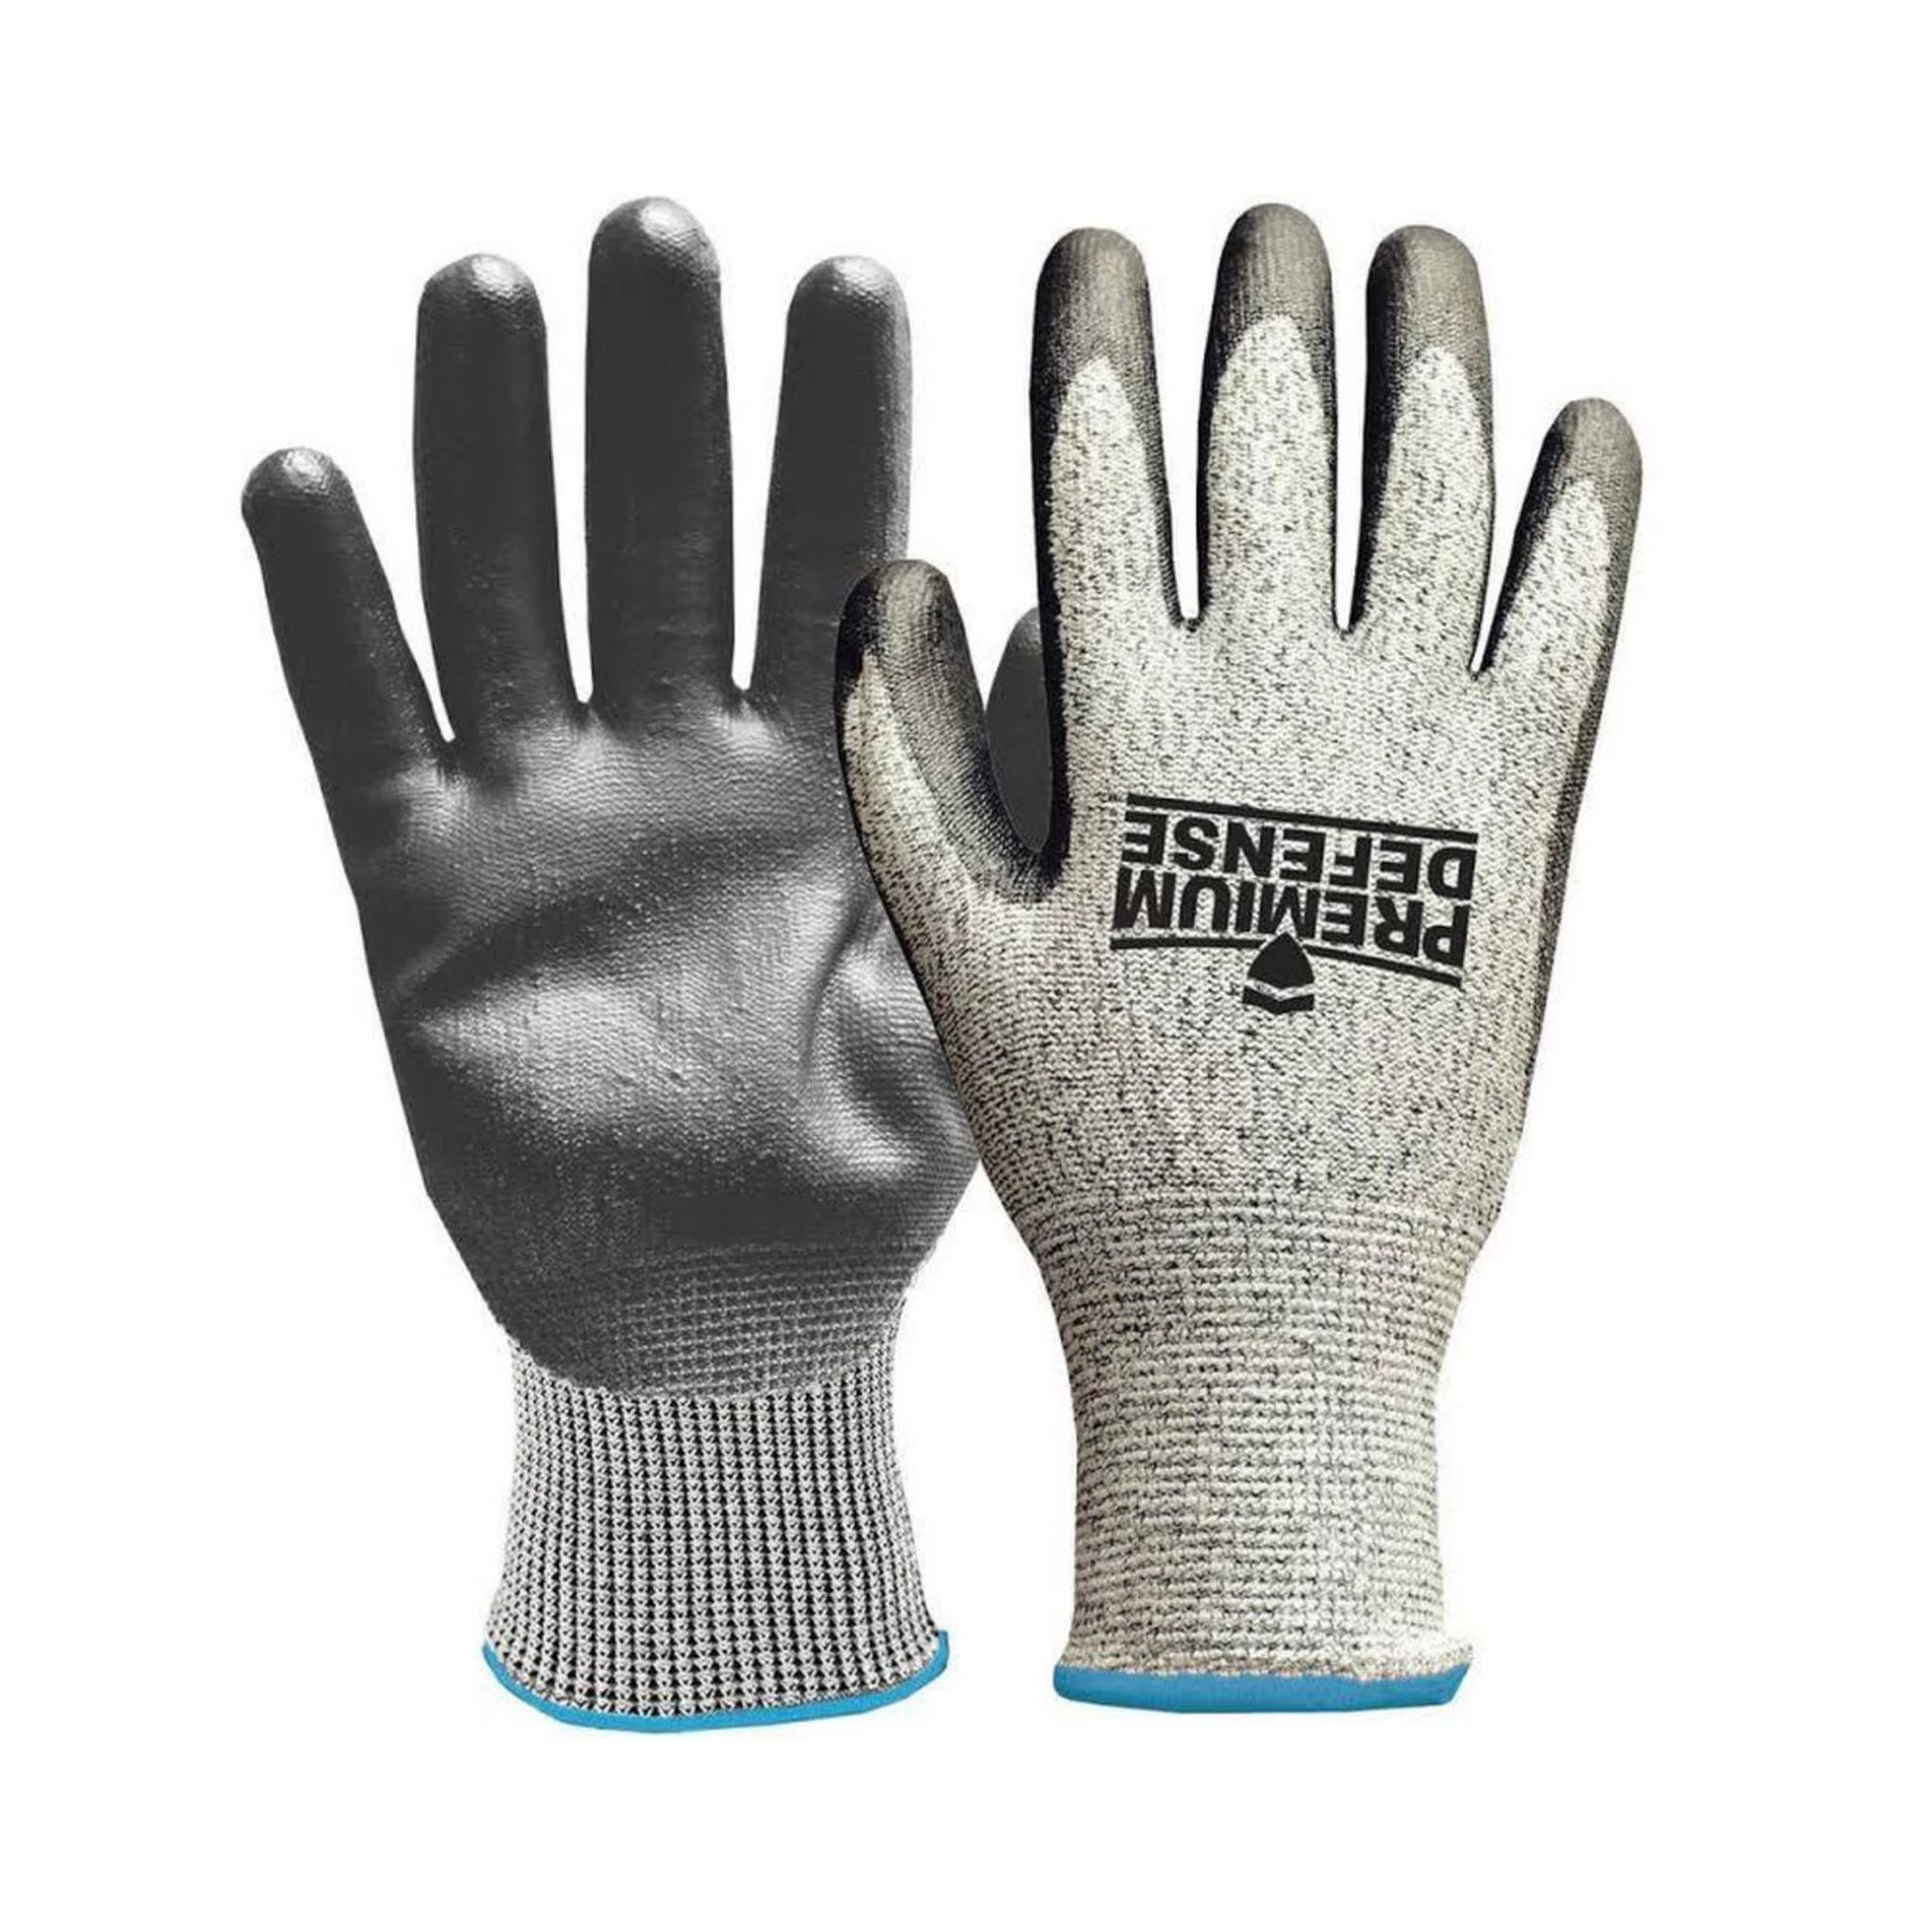 https://s7d2.scene7.com/is/image/sherwinwilliams/650934581_Bigtime_Safety_Glove?fit=constrain,1&wid=2000